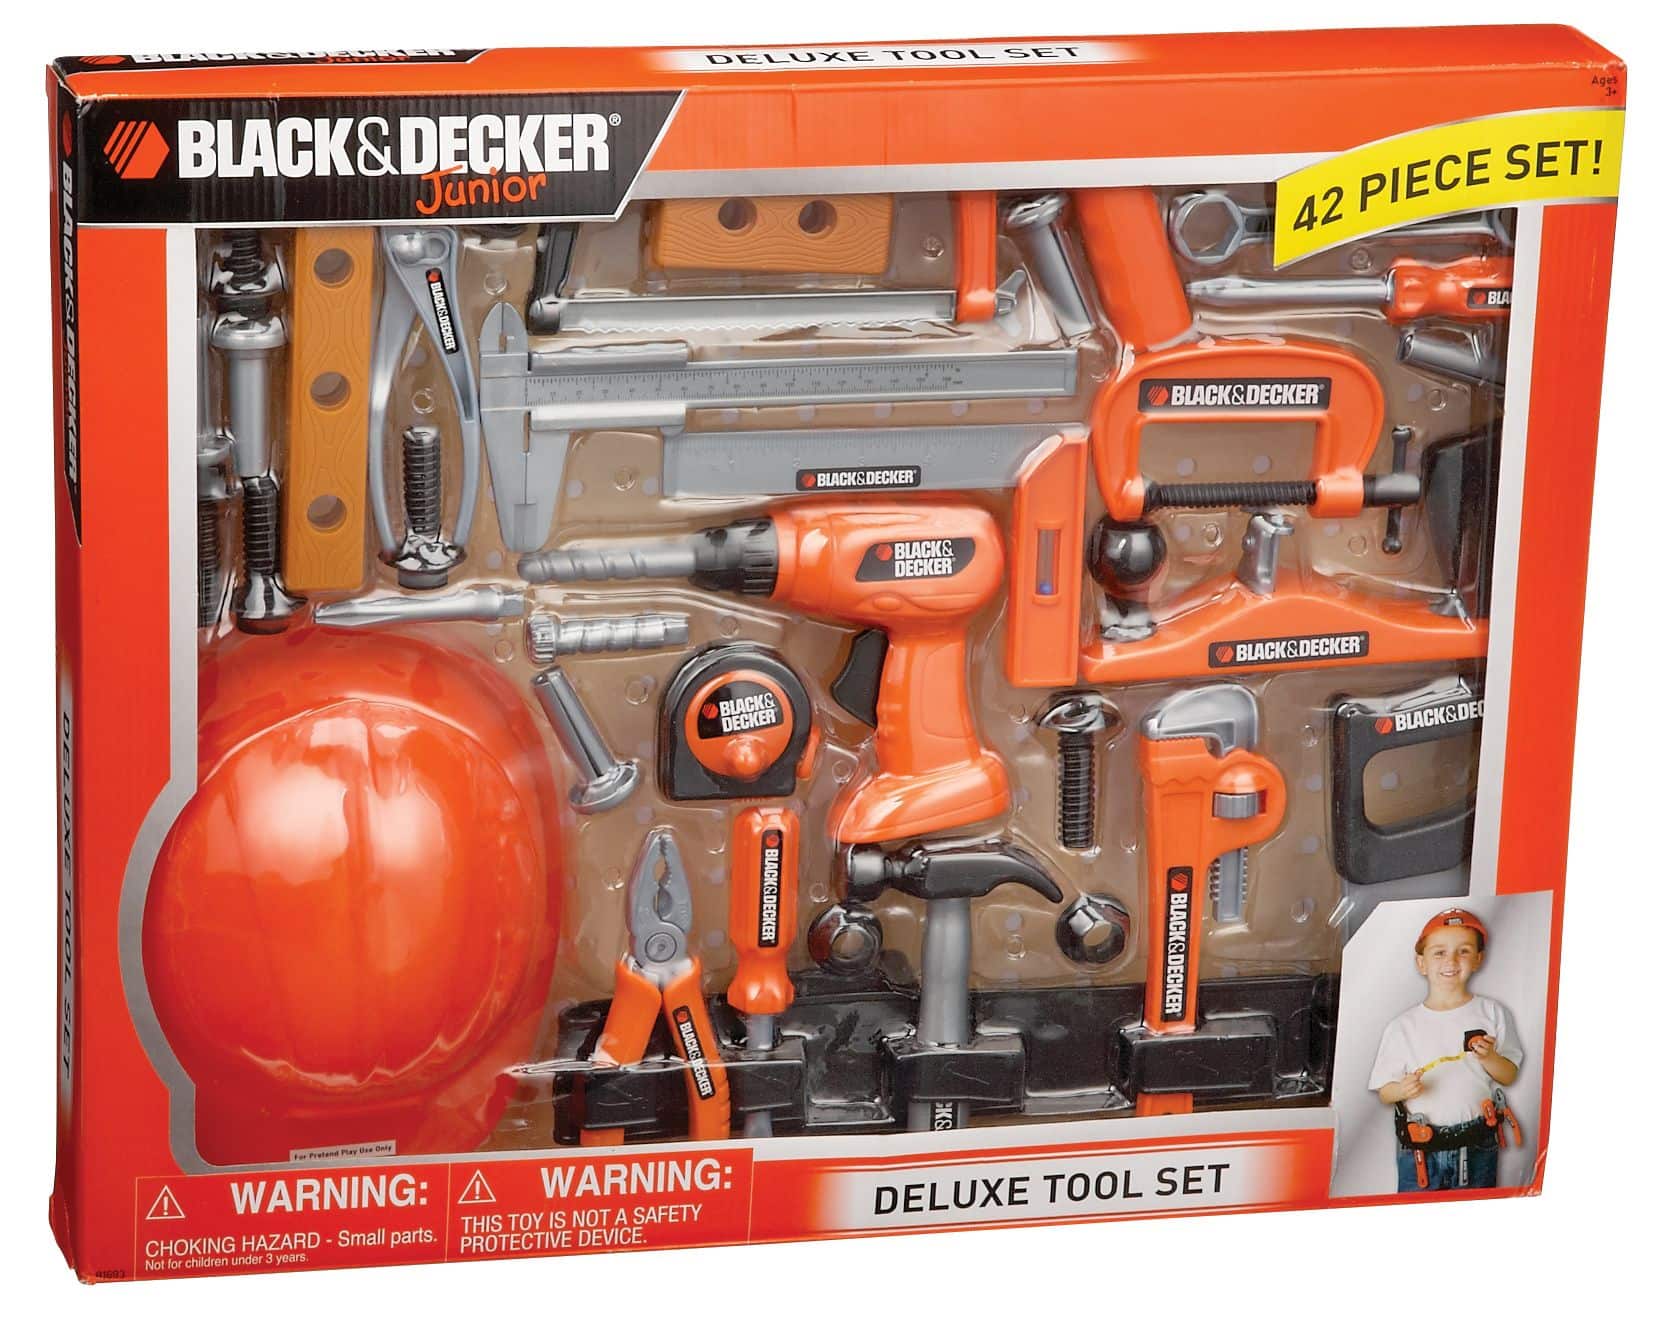 Black & Decker Black and Decker 90320 Junior Deluxe 42-Piece Toy Tool Set  with Toolbox for sale online